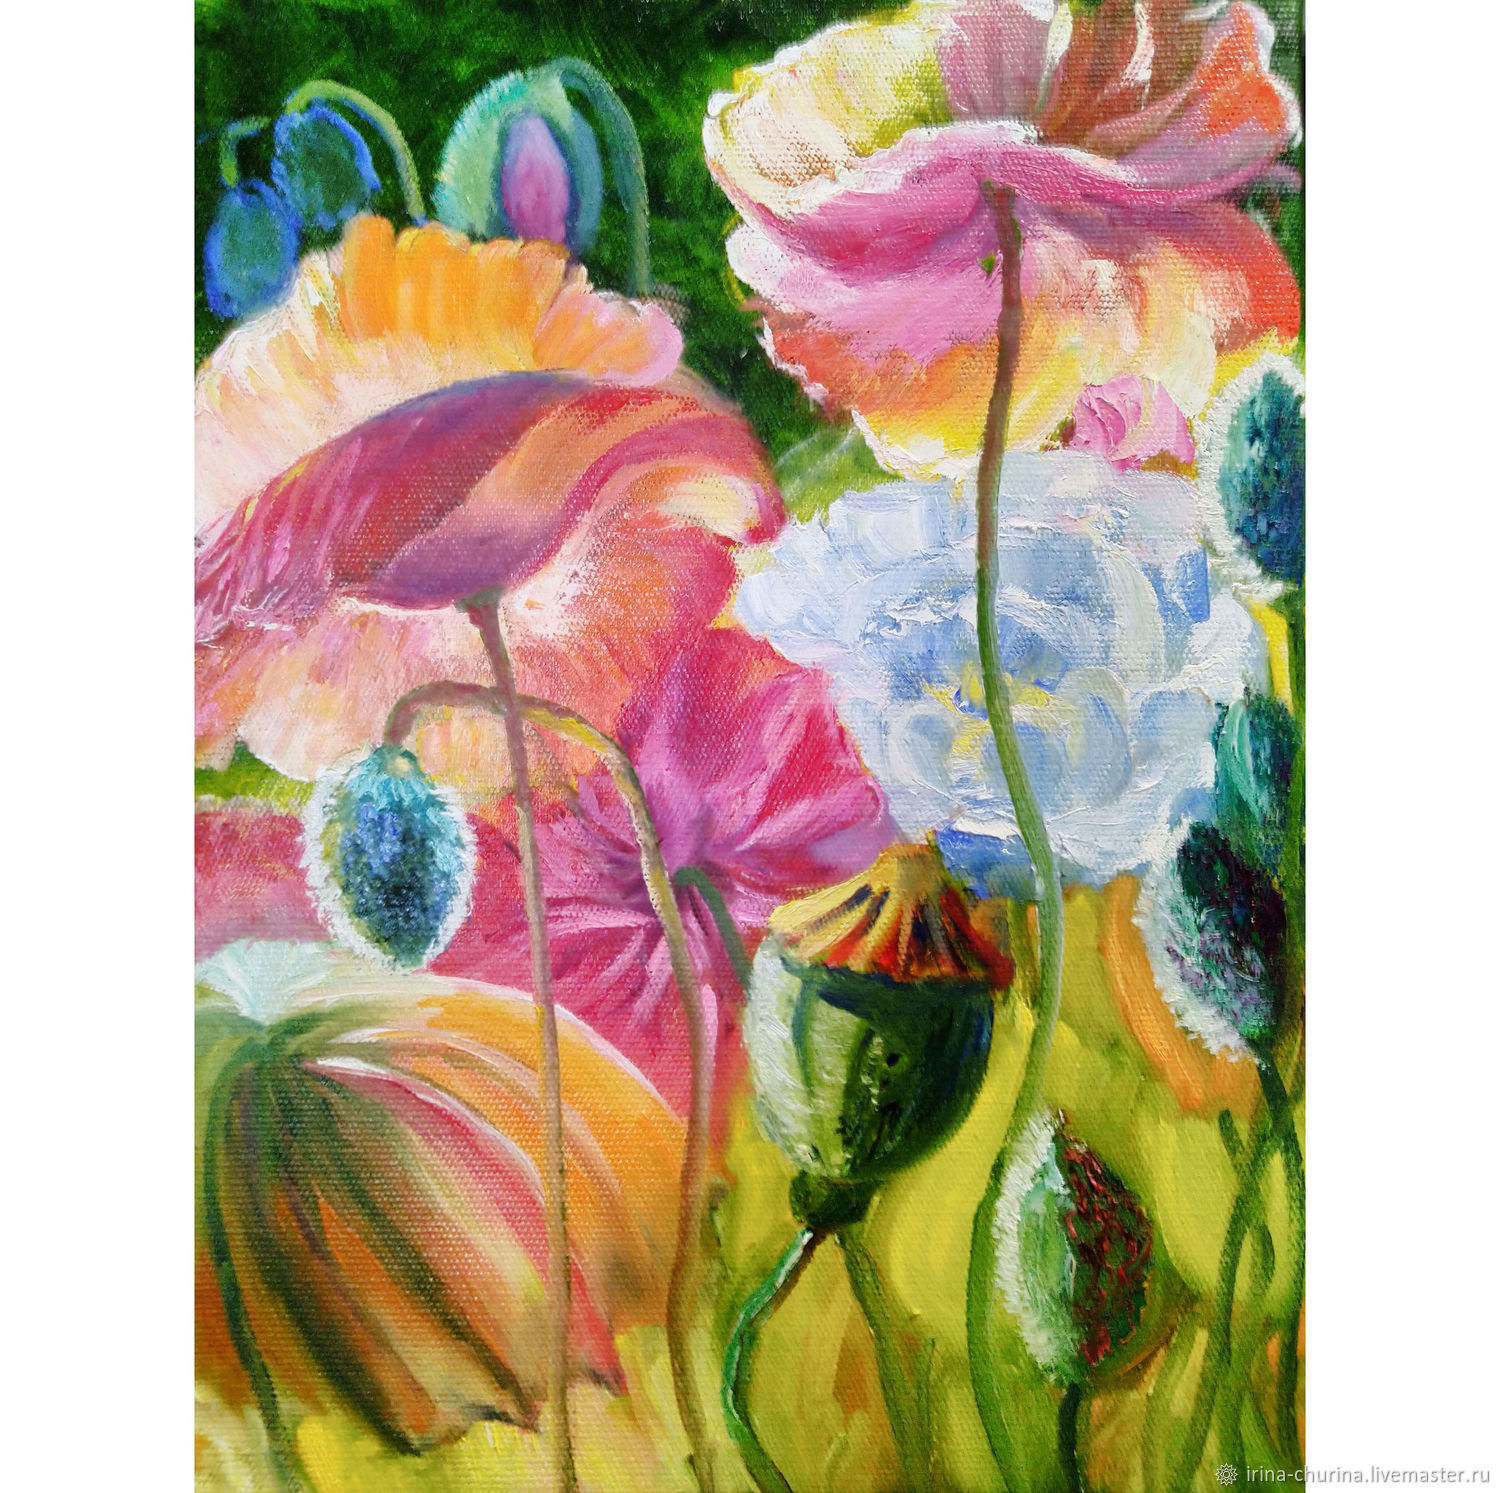 Painting: poppies flowers 'World of flowers', Pictures, Rostov-on-Don,  Фото №1